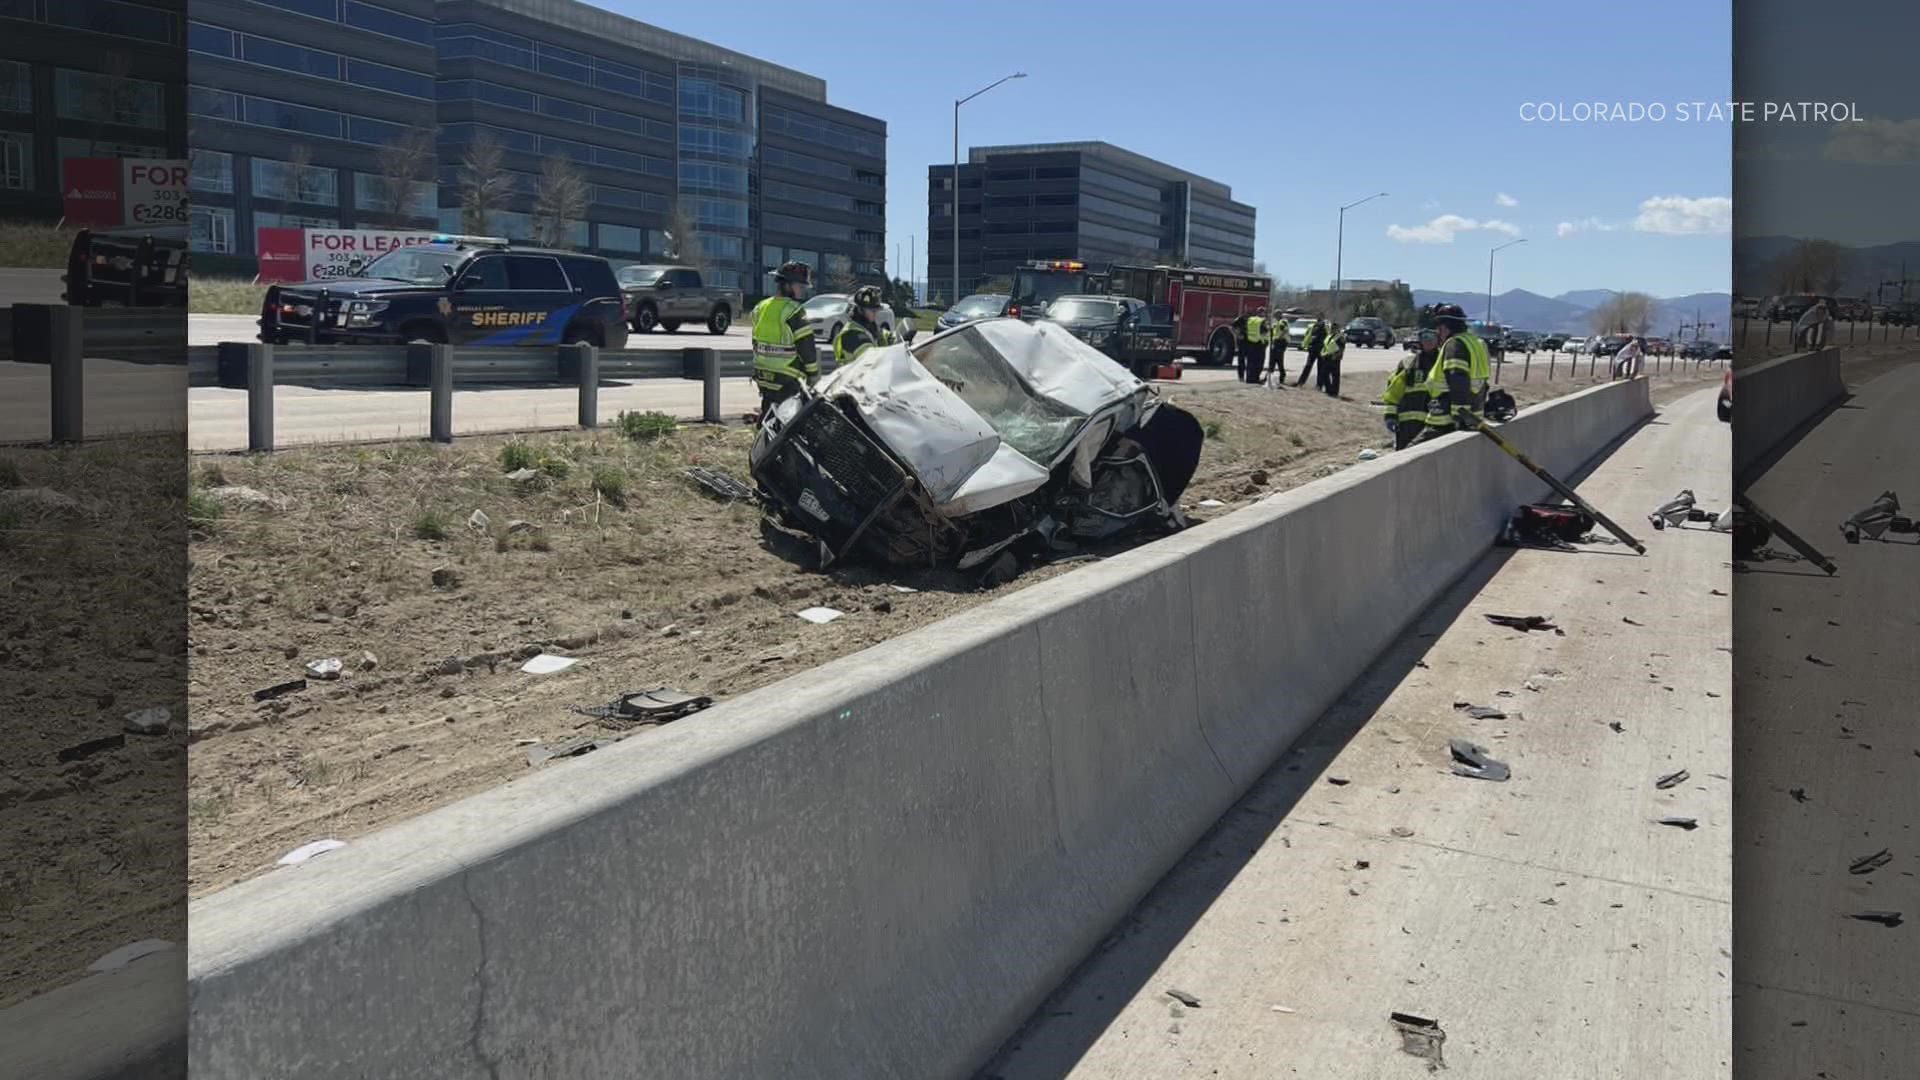 The Colorado State Patrol said the pickup truck crashed near Lucent Boulevard Saturday afternoon, killing the driver and a passenger.